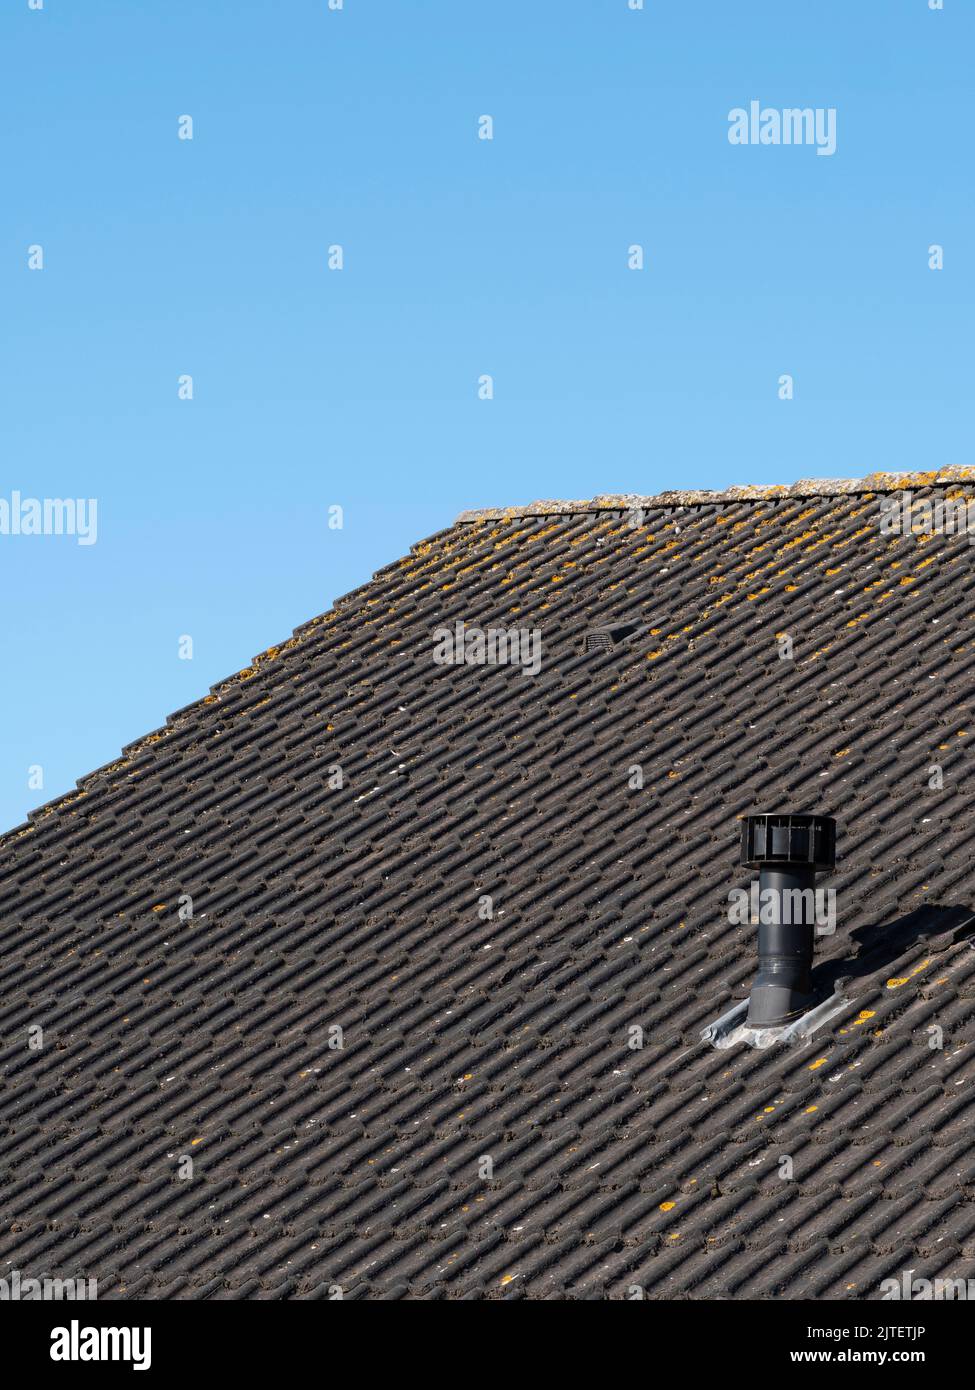 Black roof with pipe for the ventilation system and the background is a beautiful light blue sky Stock Photo